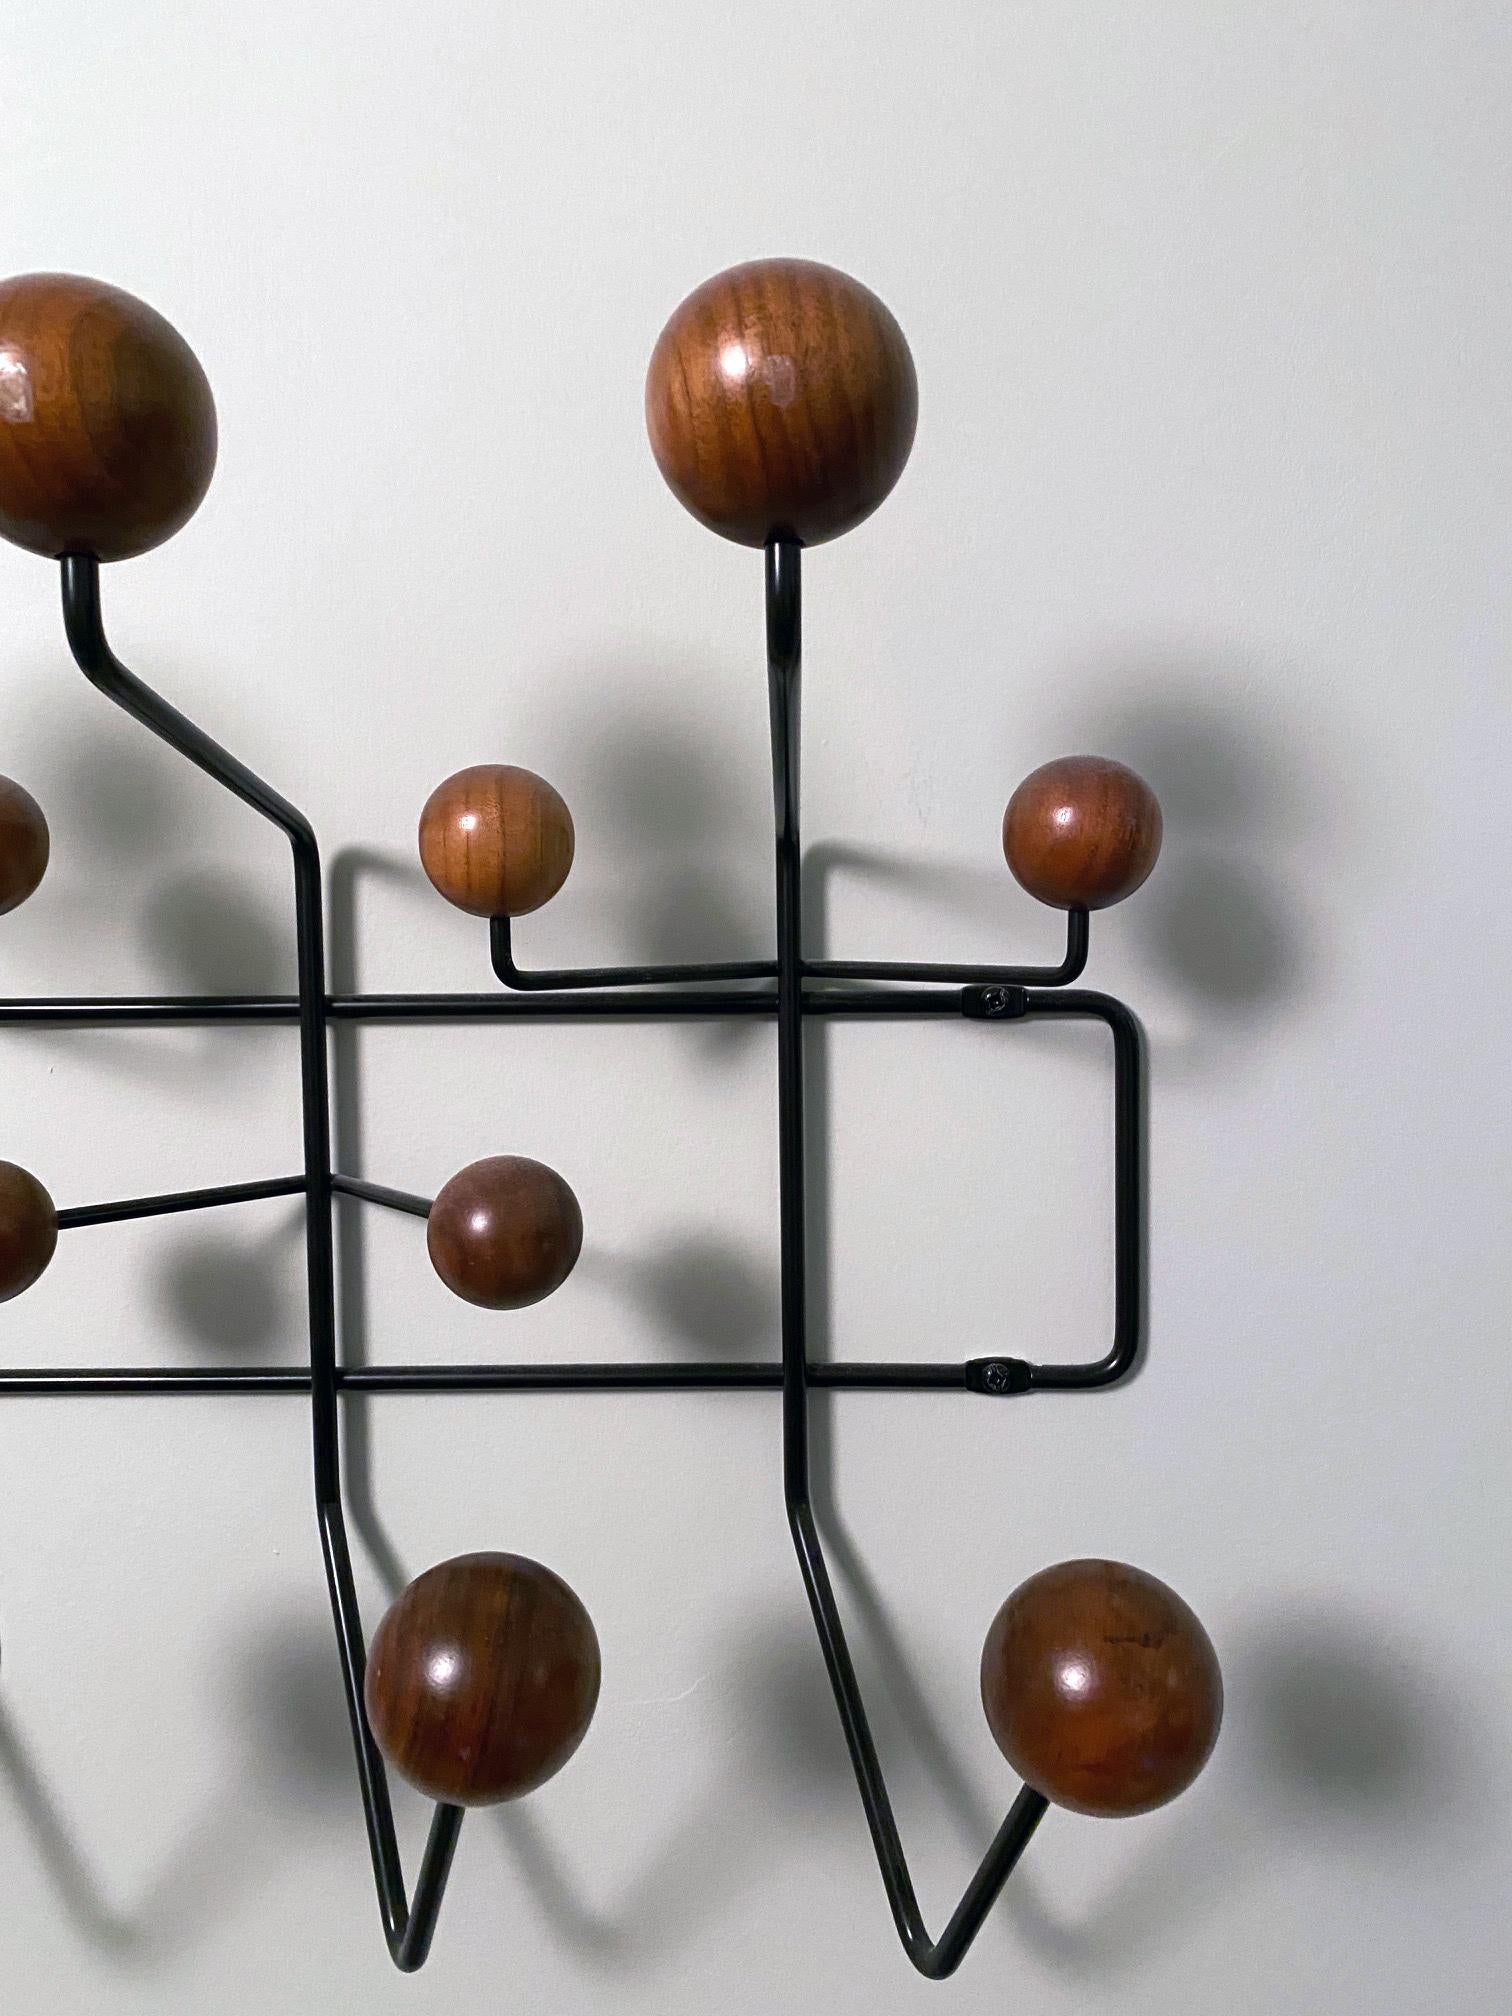 Eames Hang-It-All Designed by Charles and Ray Eames, produced by Herman Miller 1